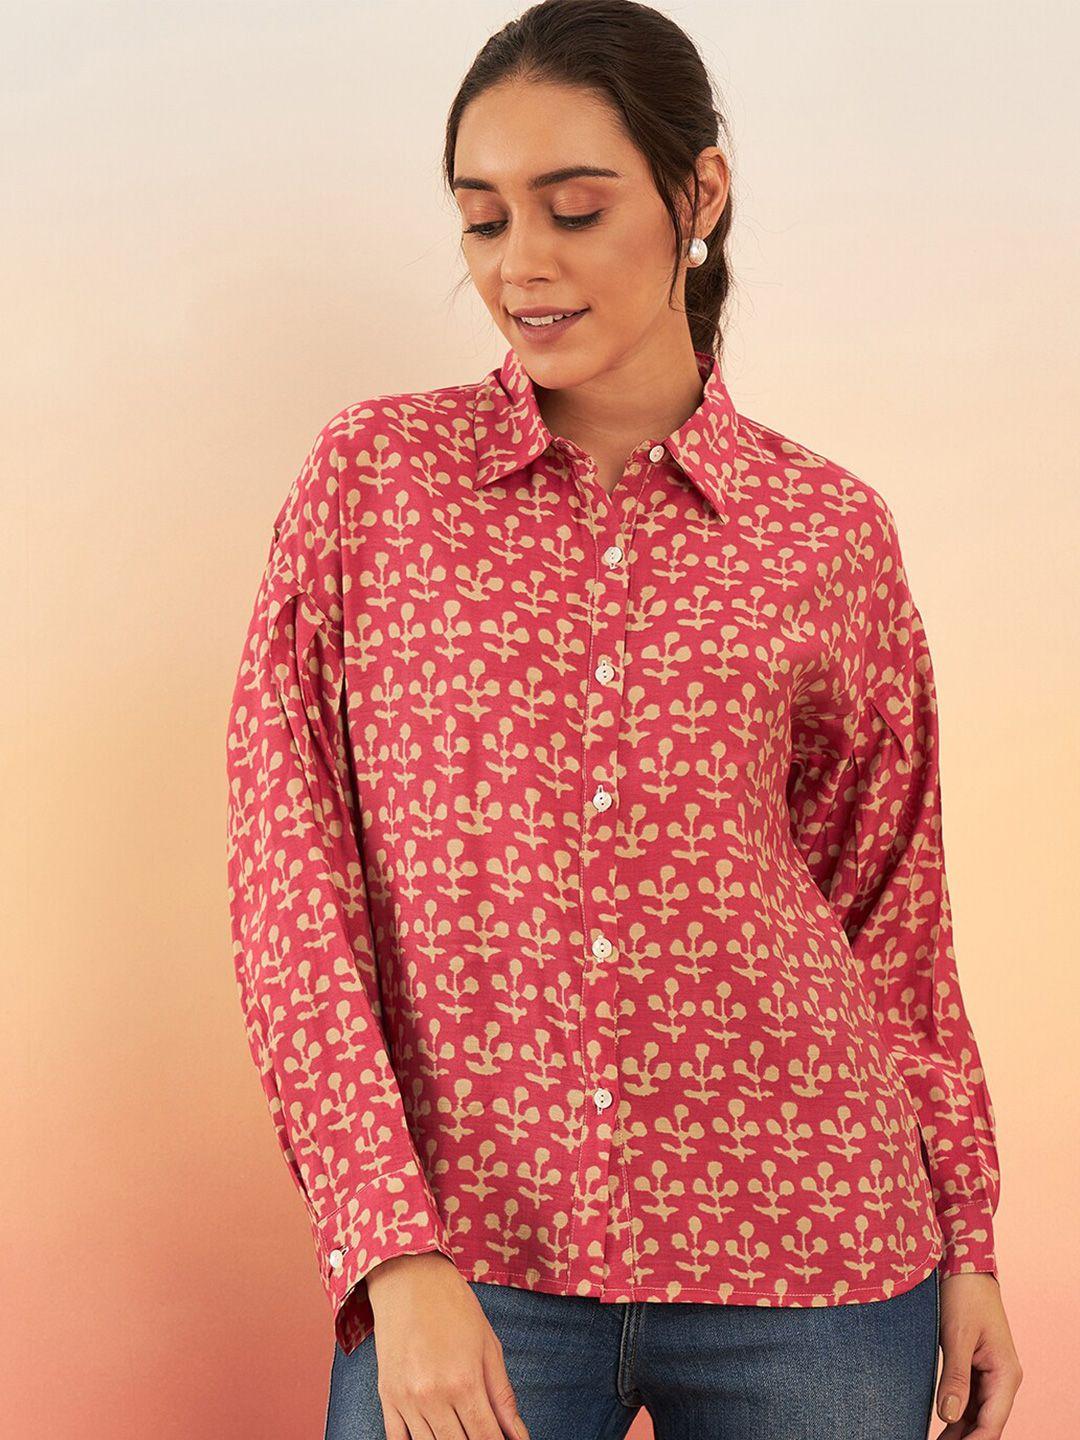 sangria red & white floral printed chanderi silk casual shirts